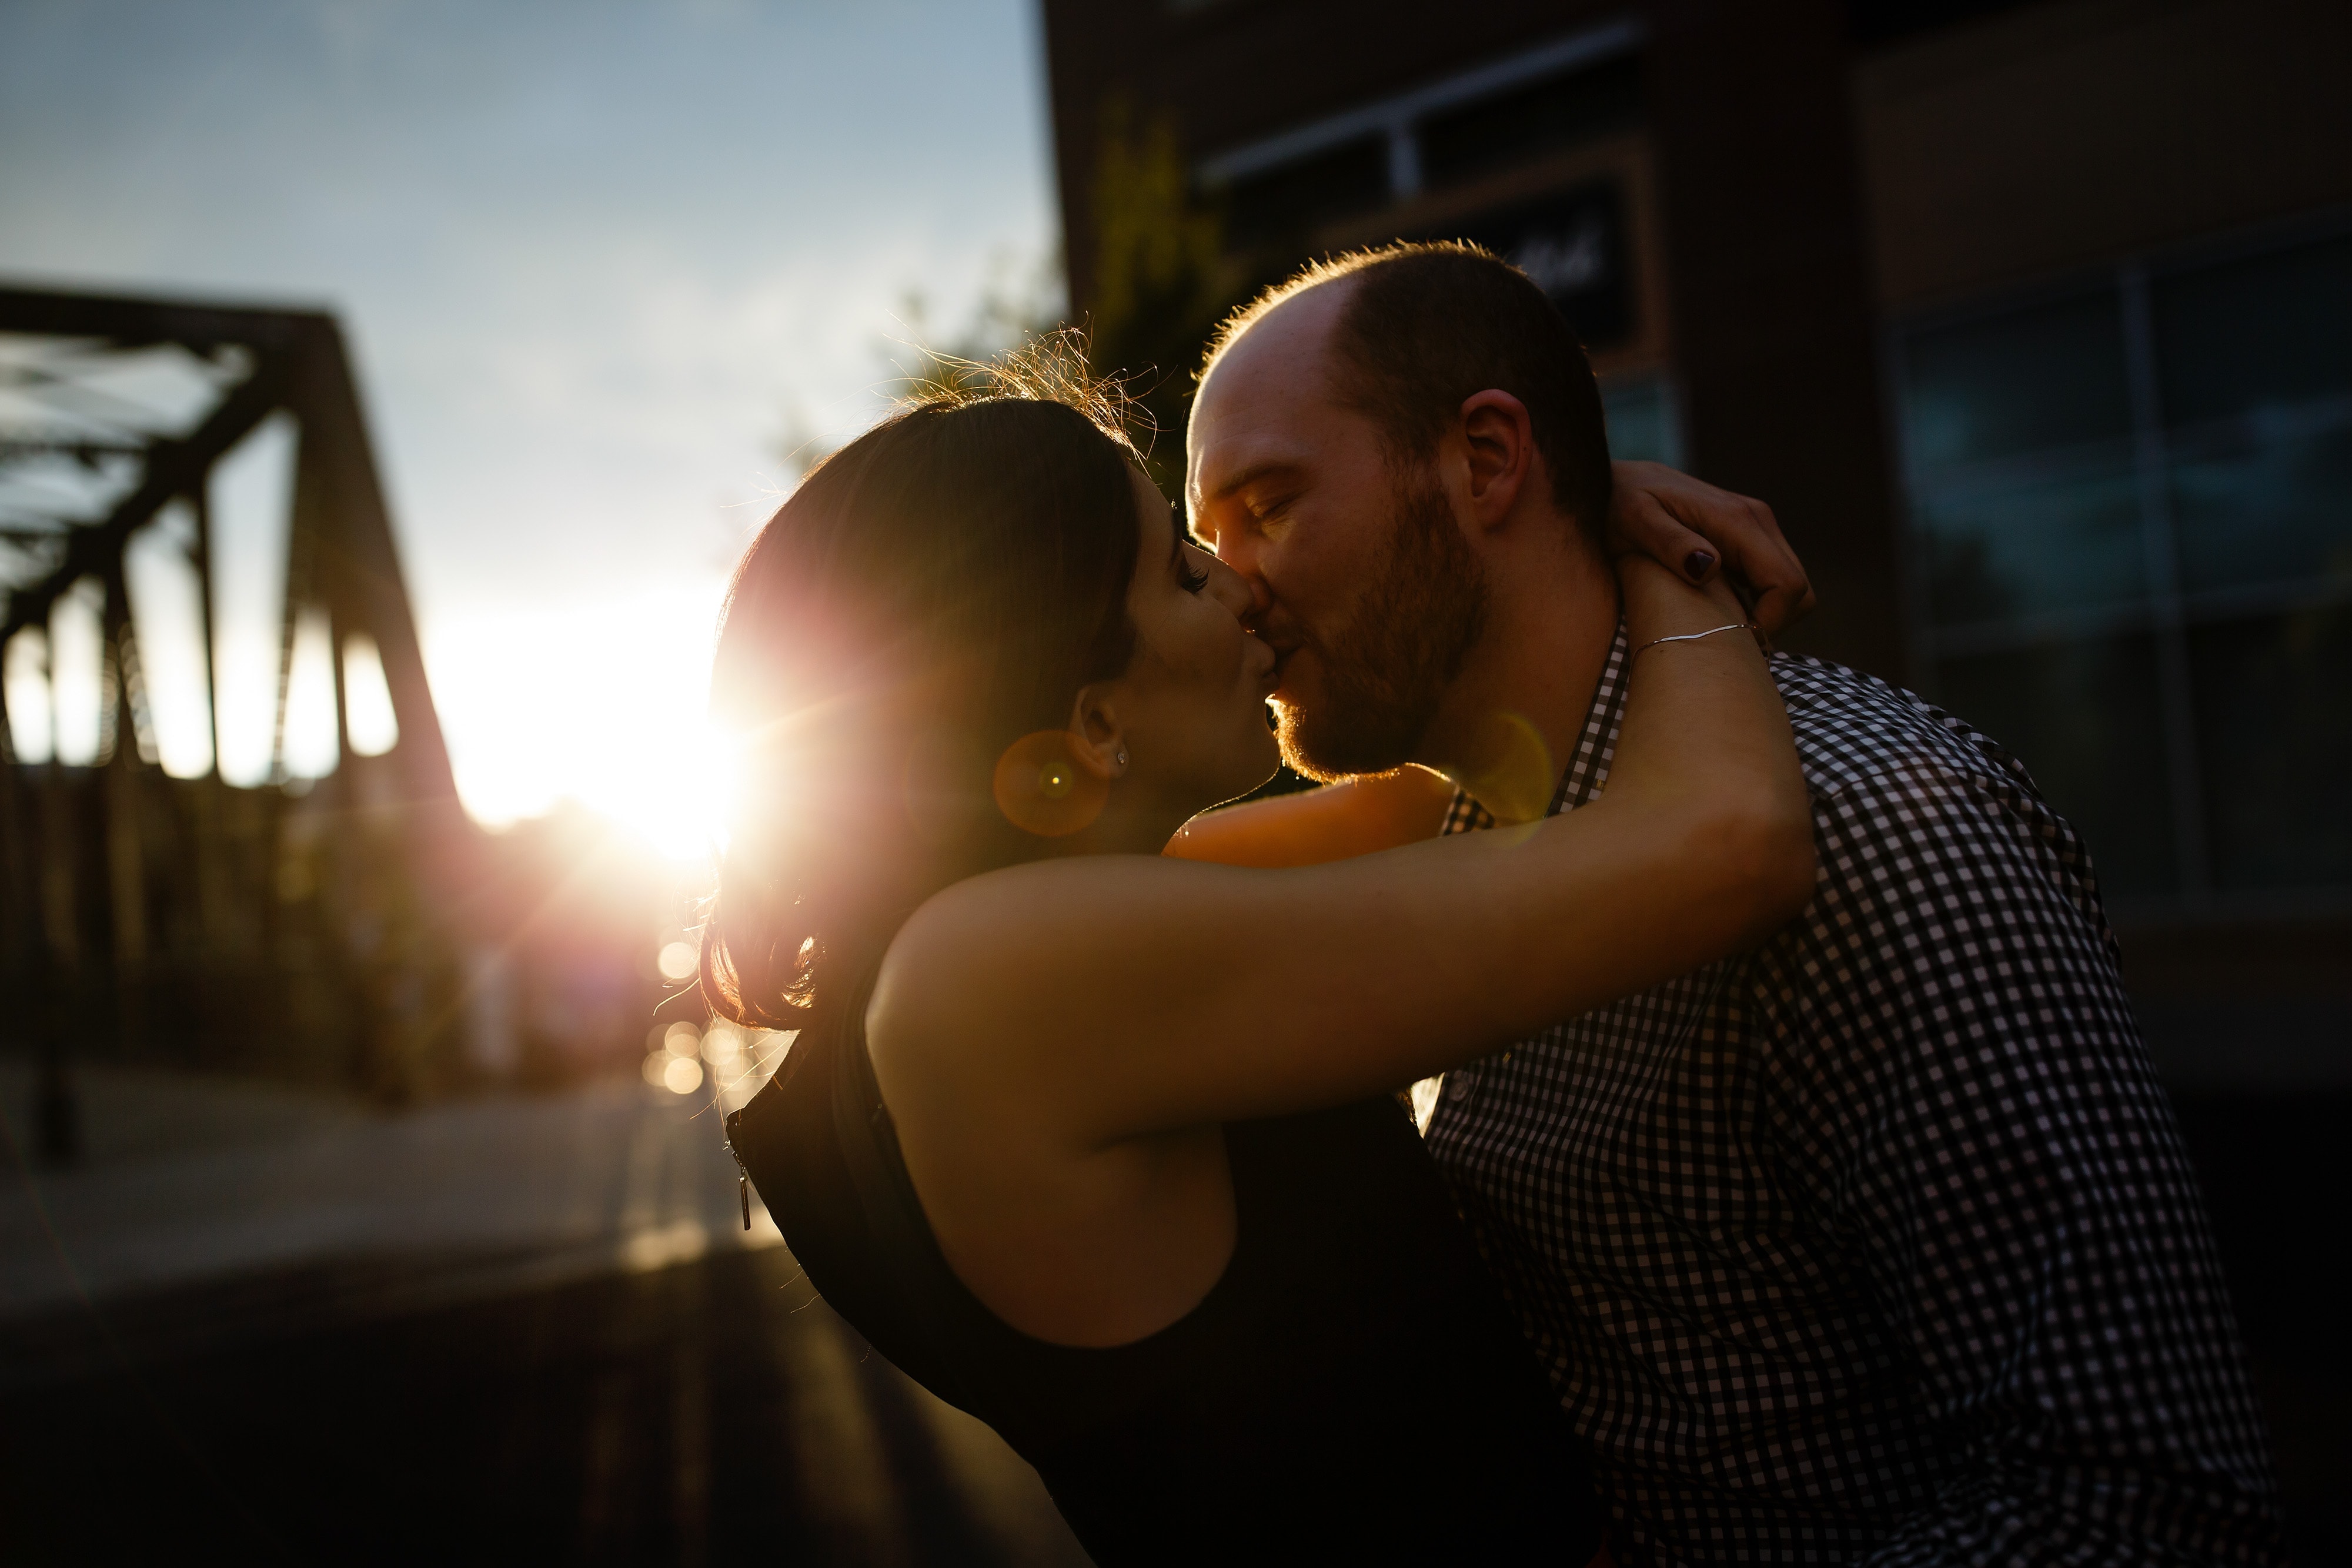 The sunlight flares past the Wynkoop Street bridge as Chris and Angie kiss